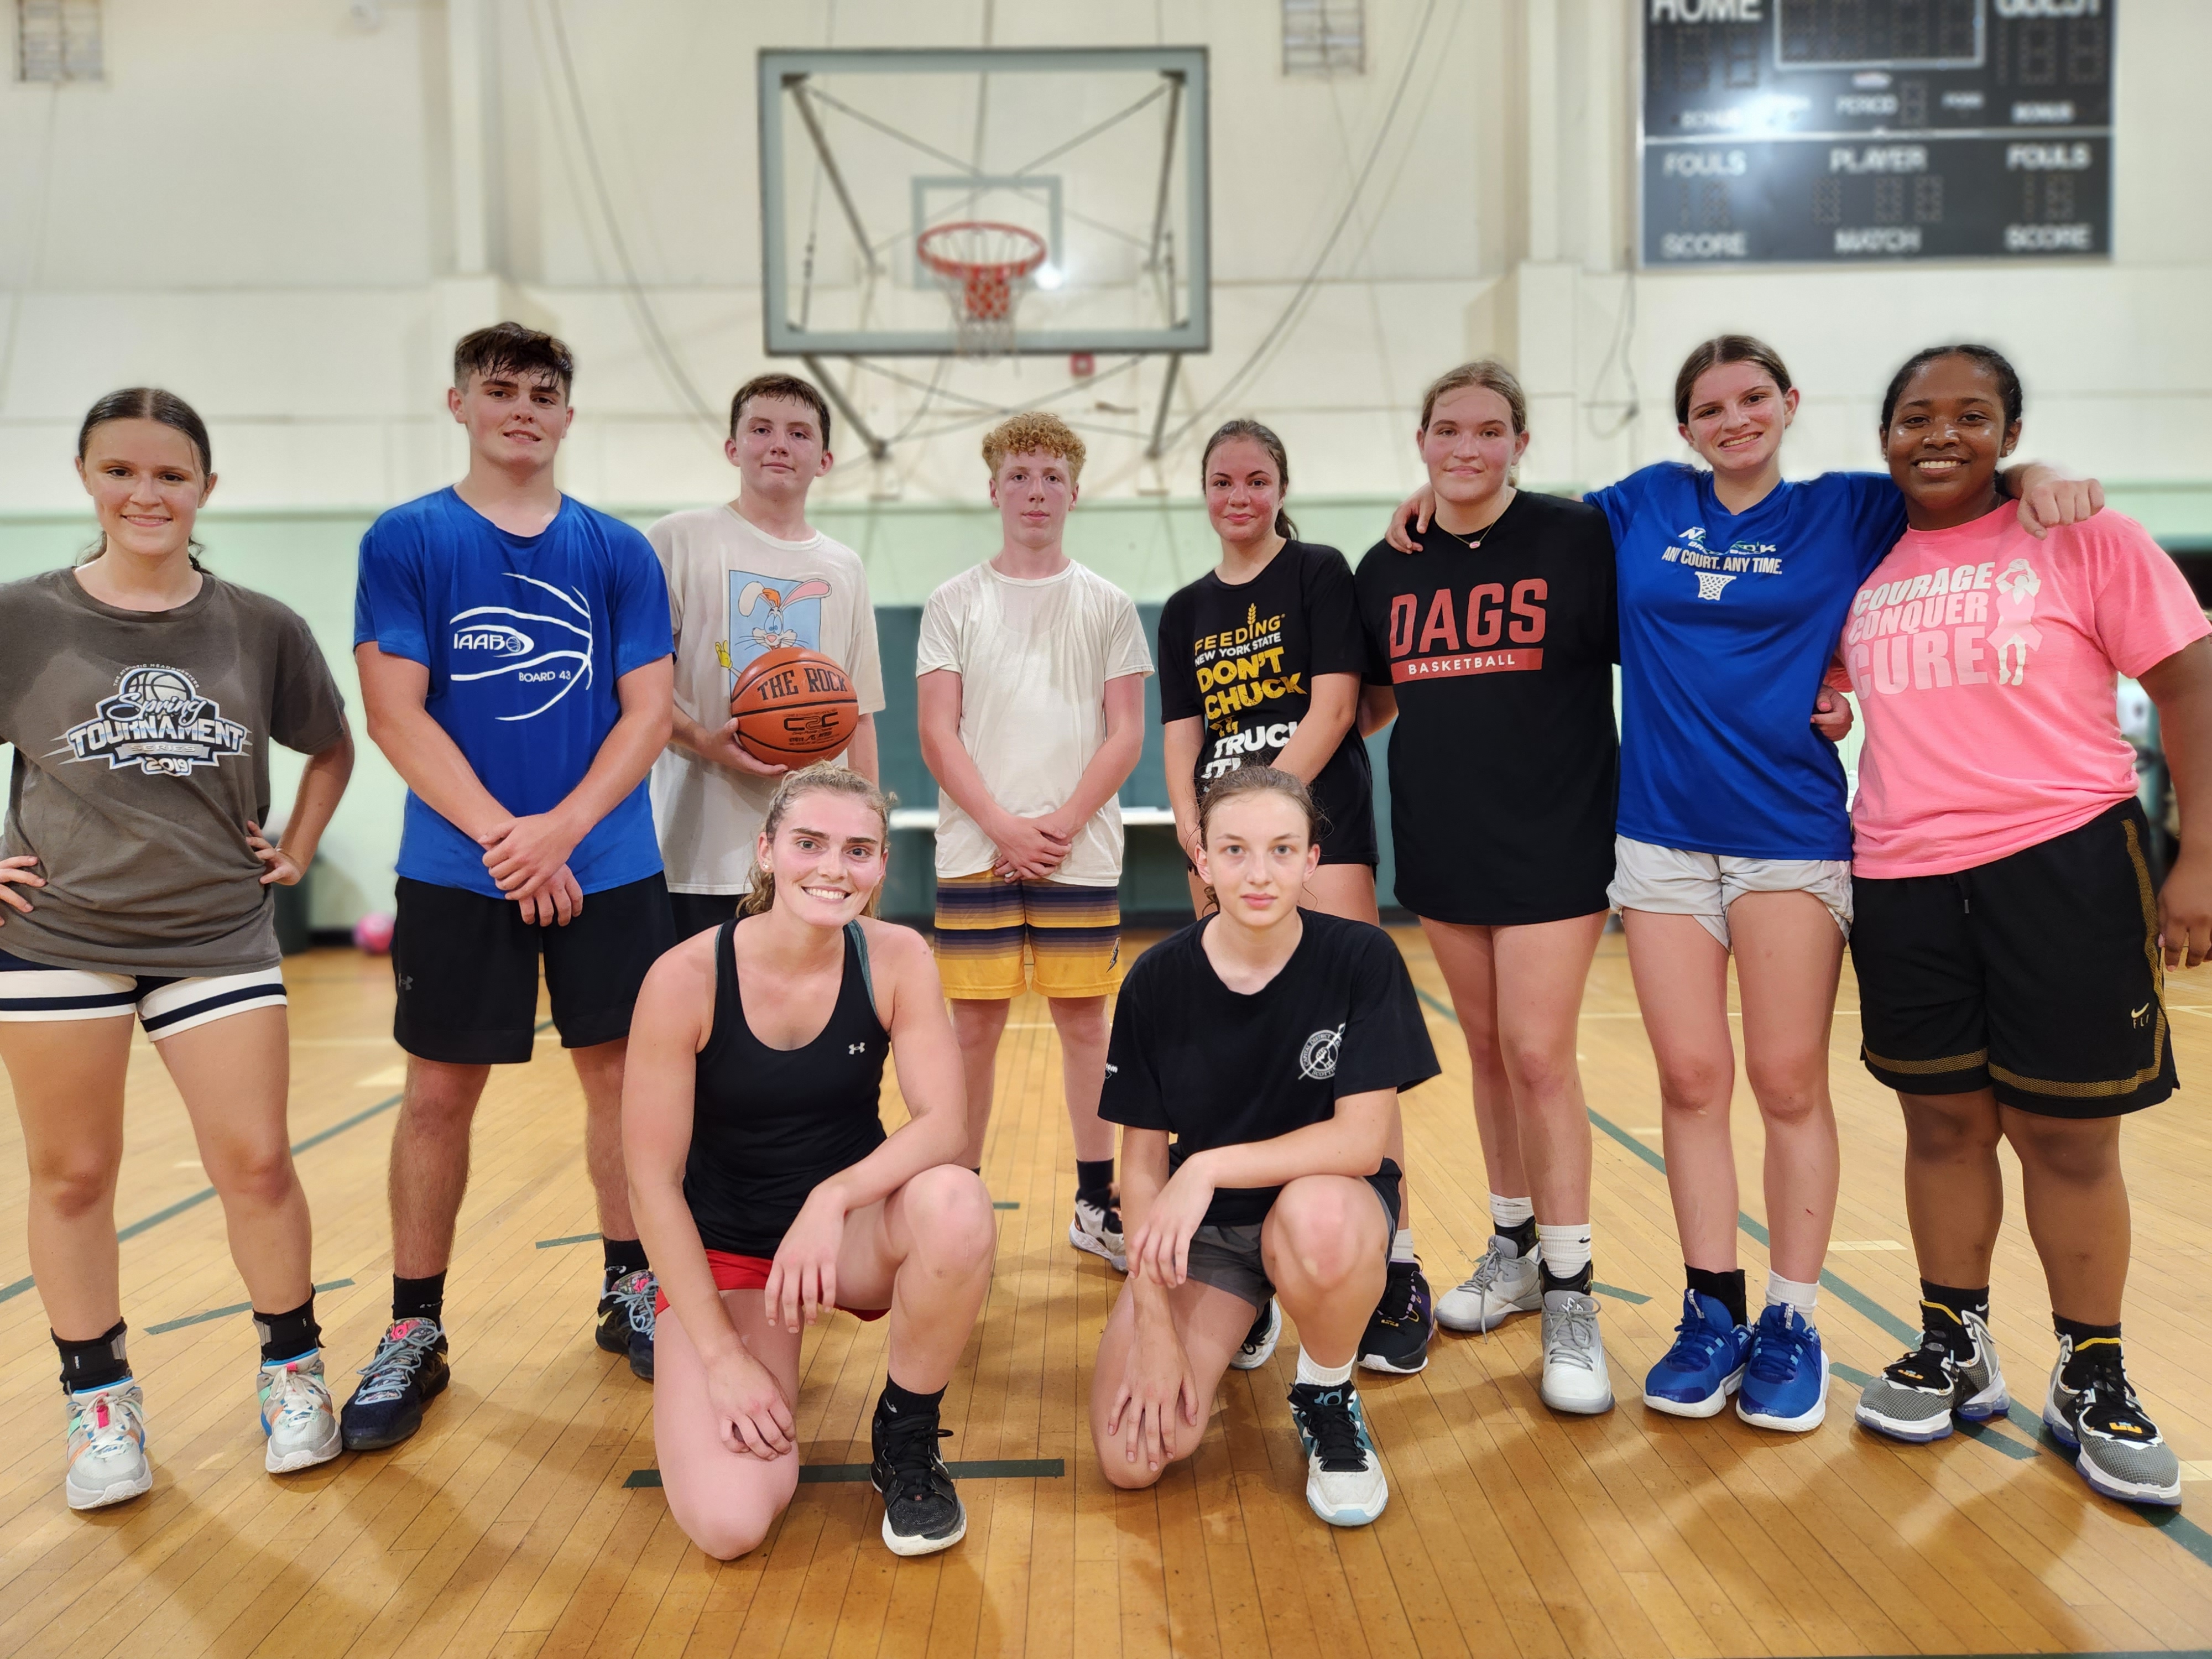 Tay Fisher Basketball Training, Small Group trainings are designed